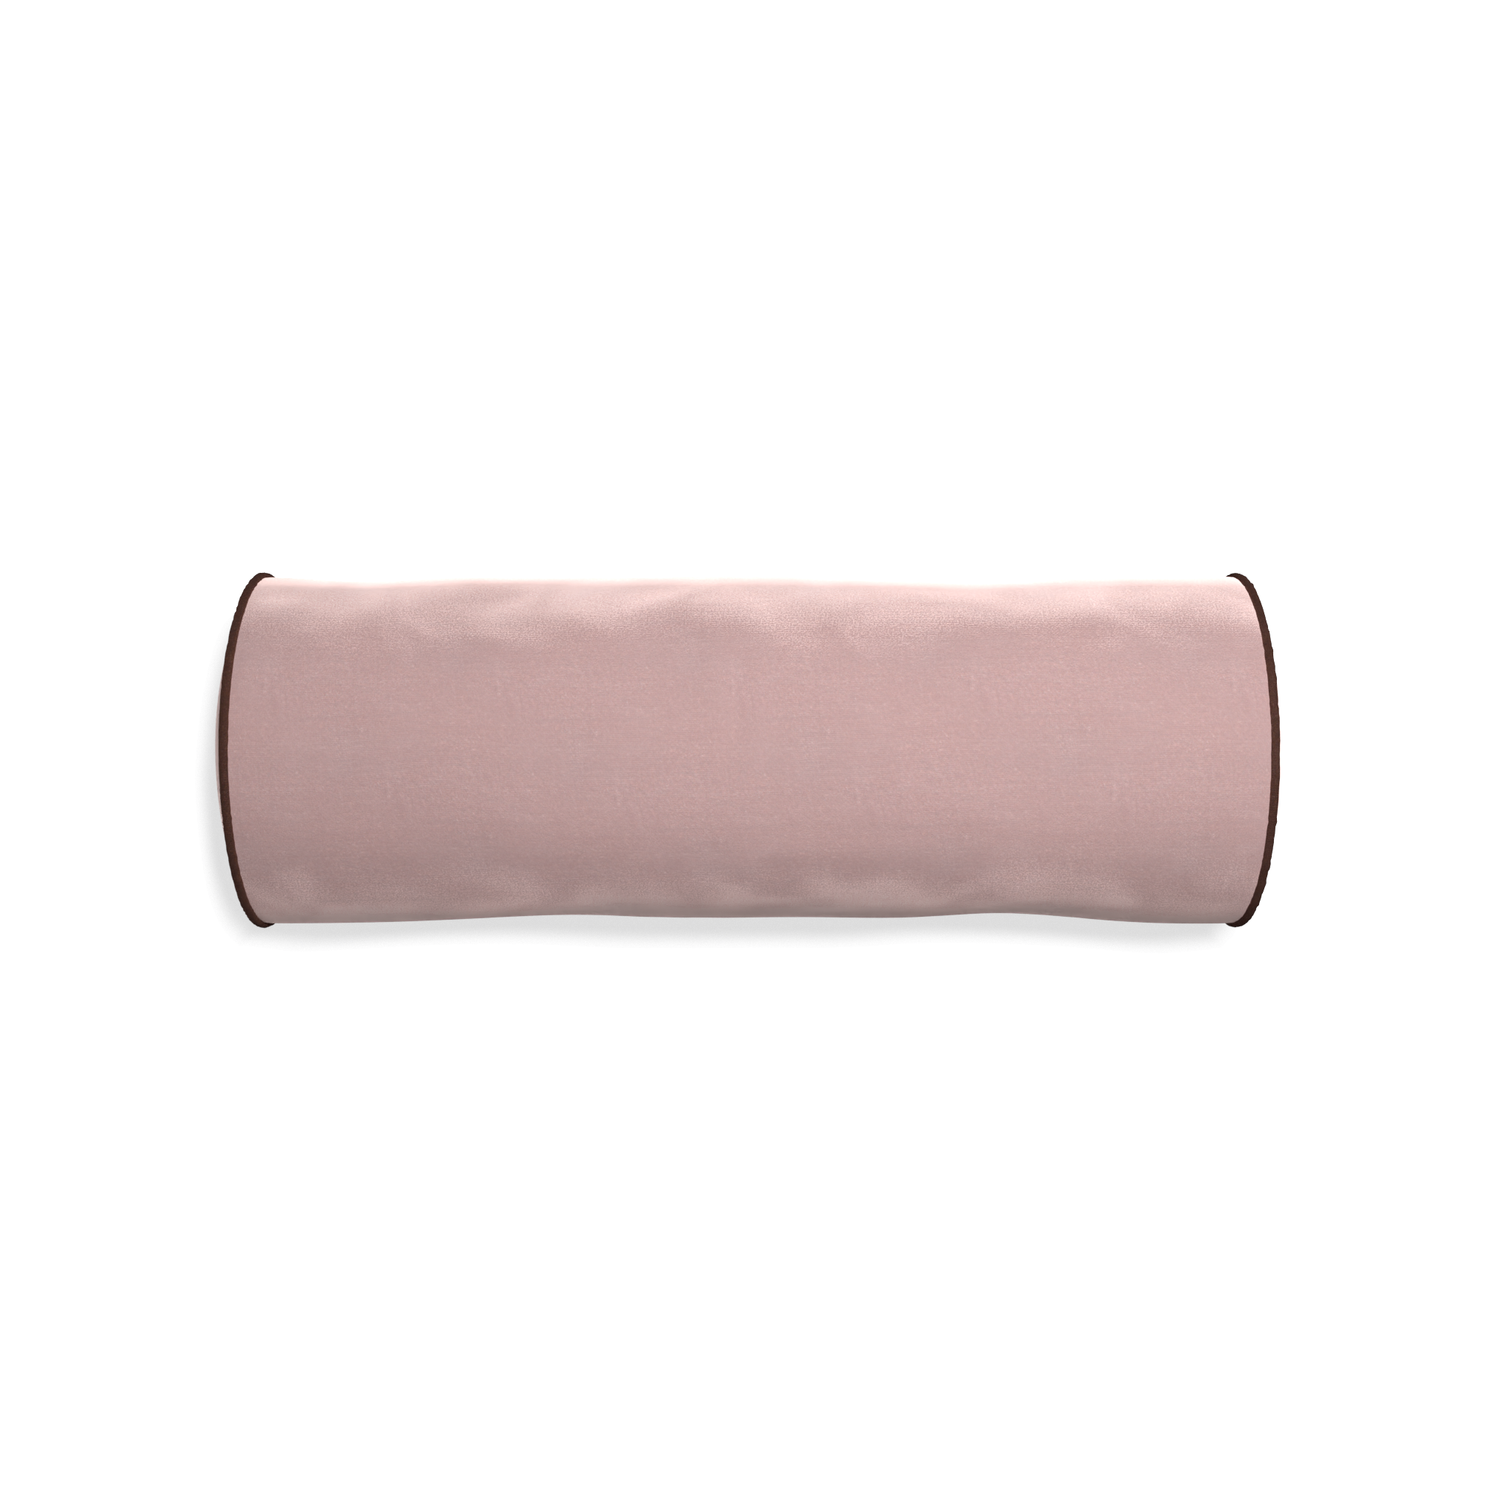 bolster mauve velvet pillow with brown piping